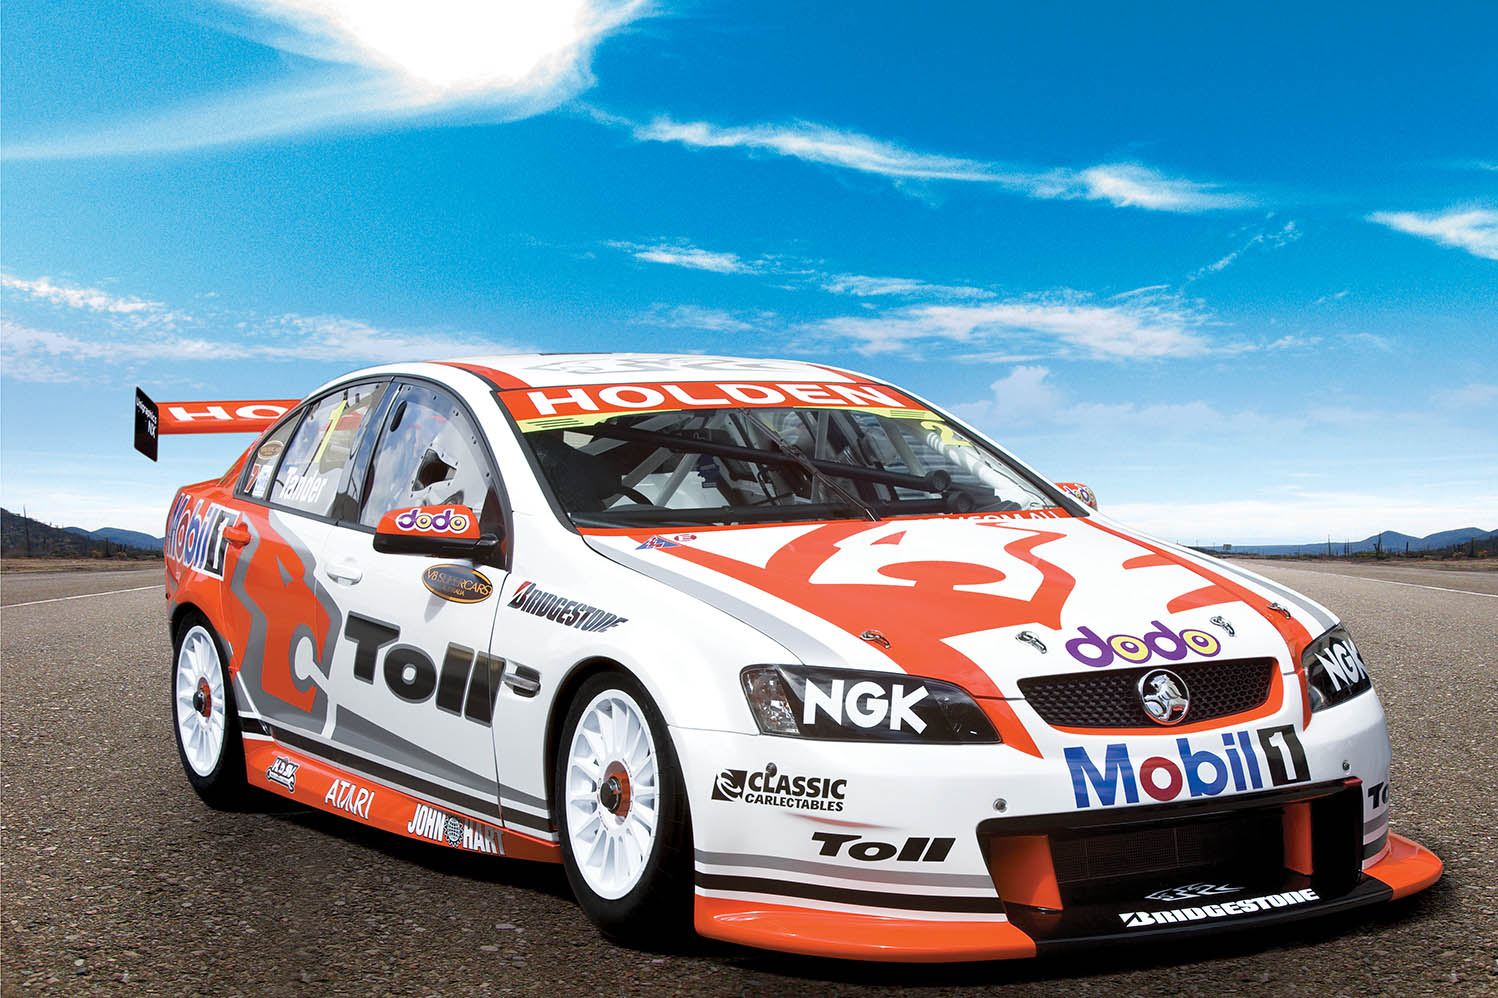 v8 supercars Picture